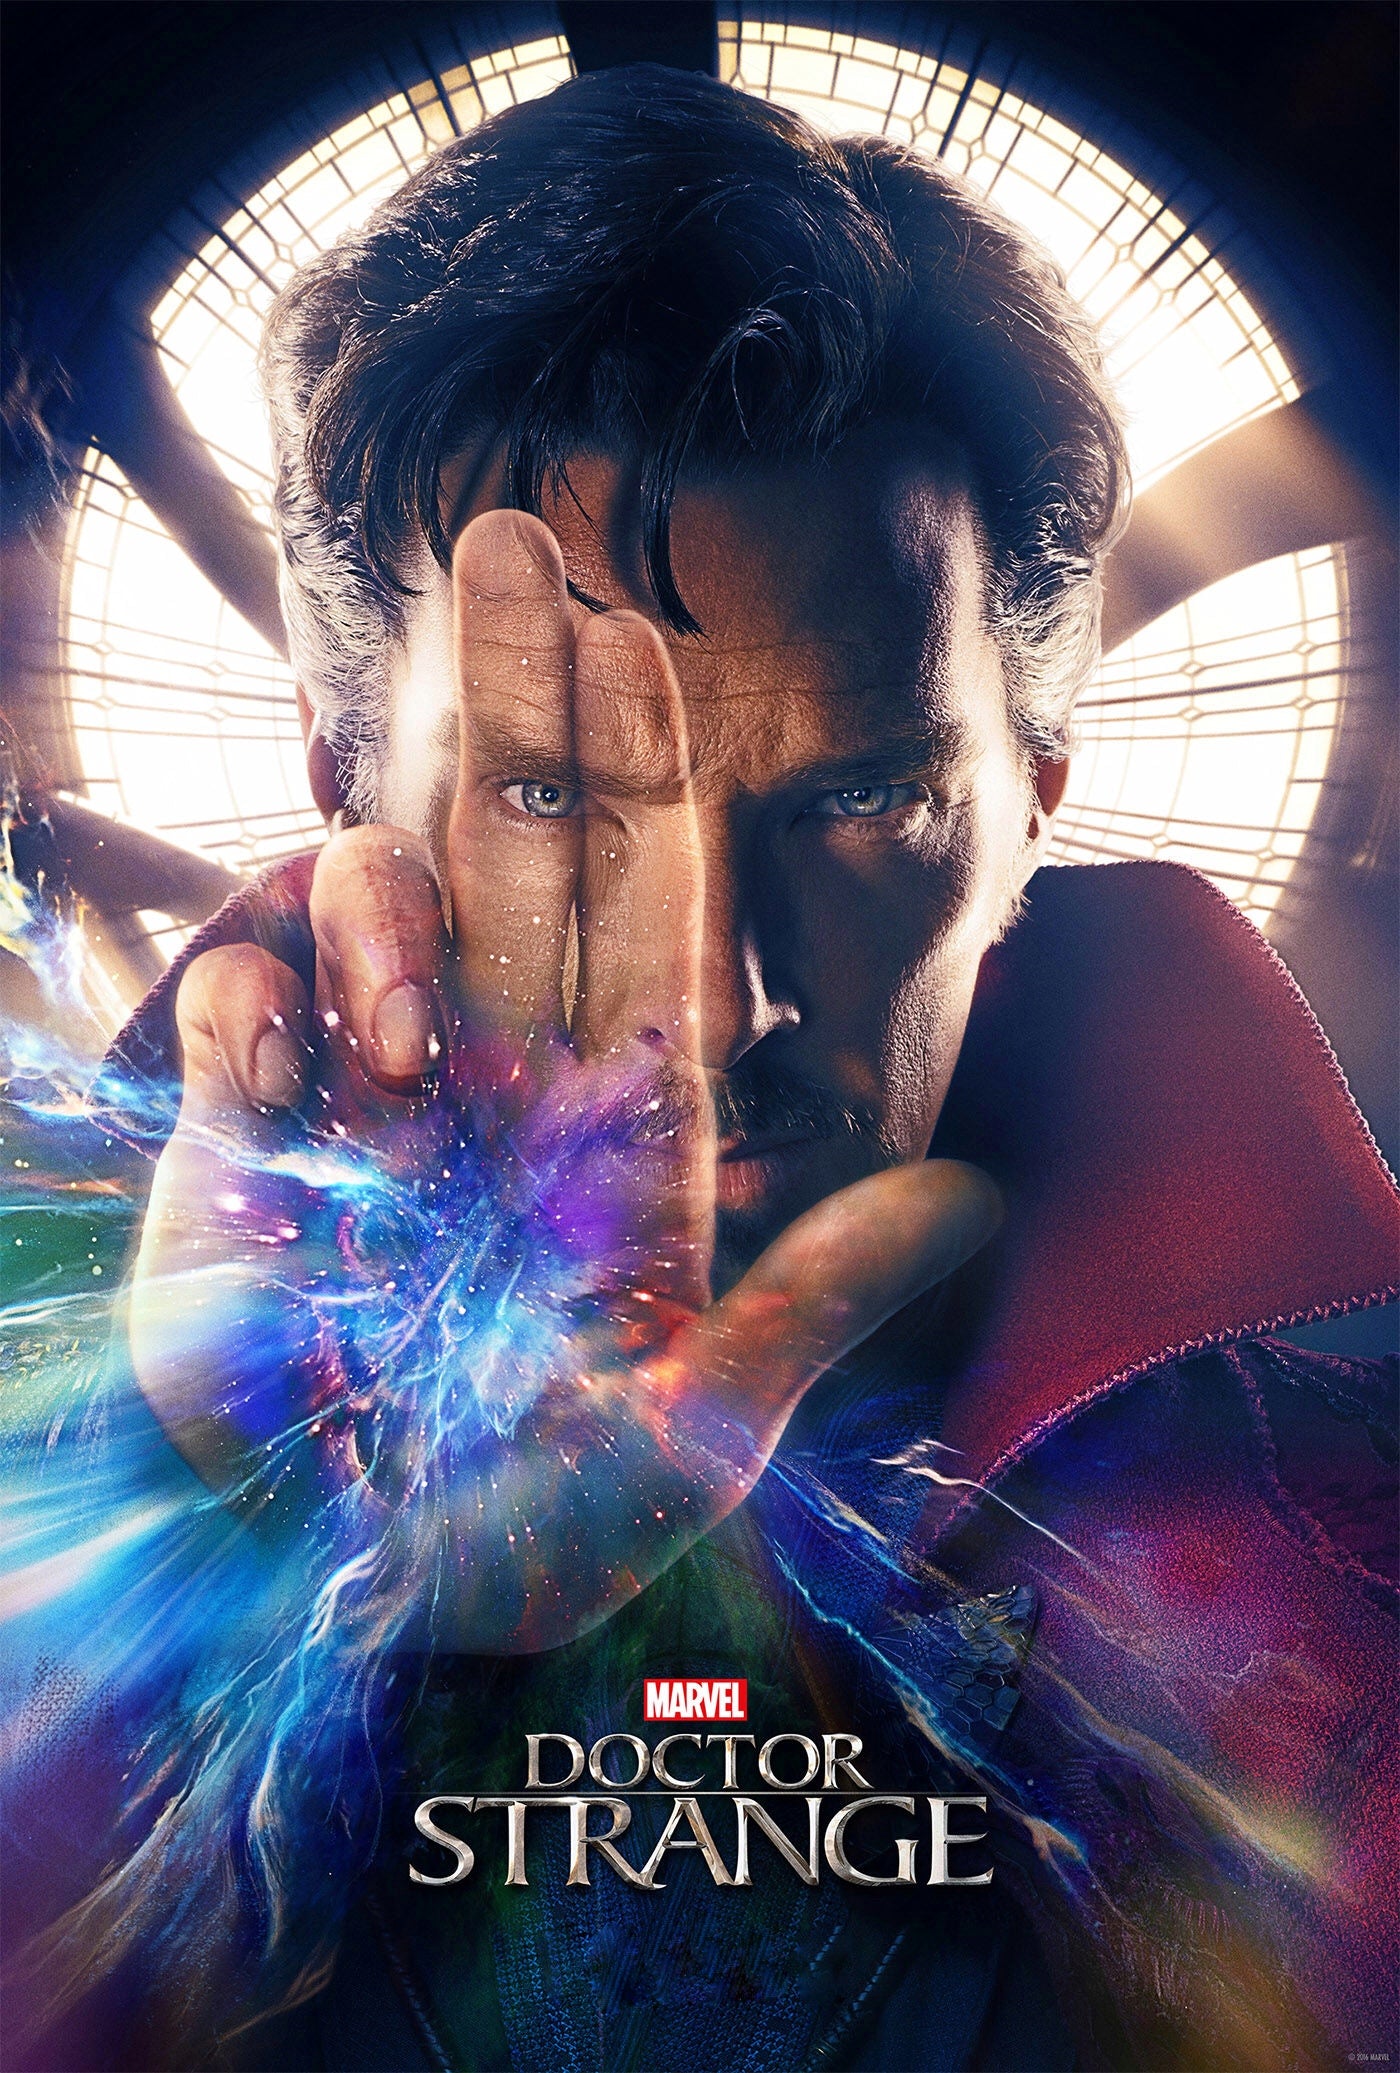 Doctor Strange (2016) Vudu or Movies Anywhere HD redemption only